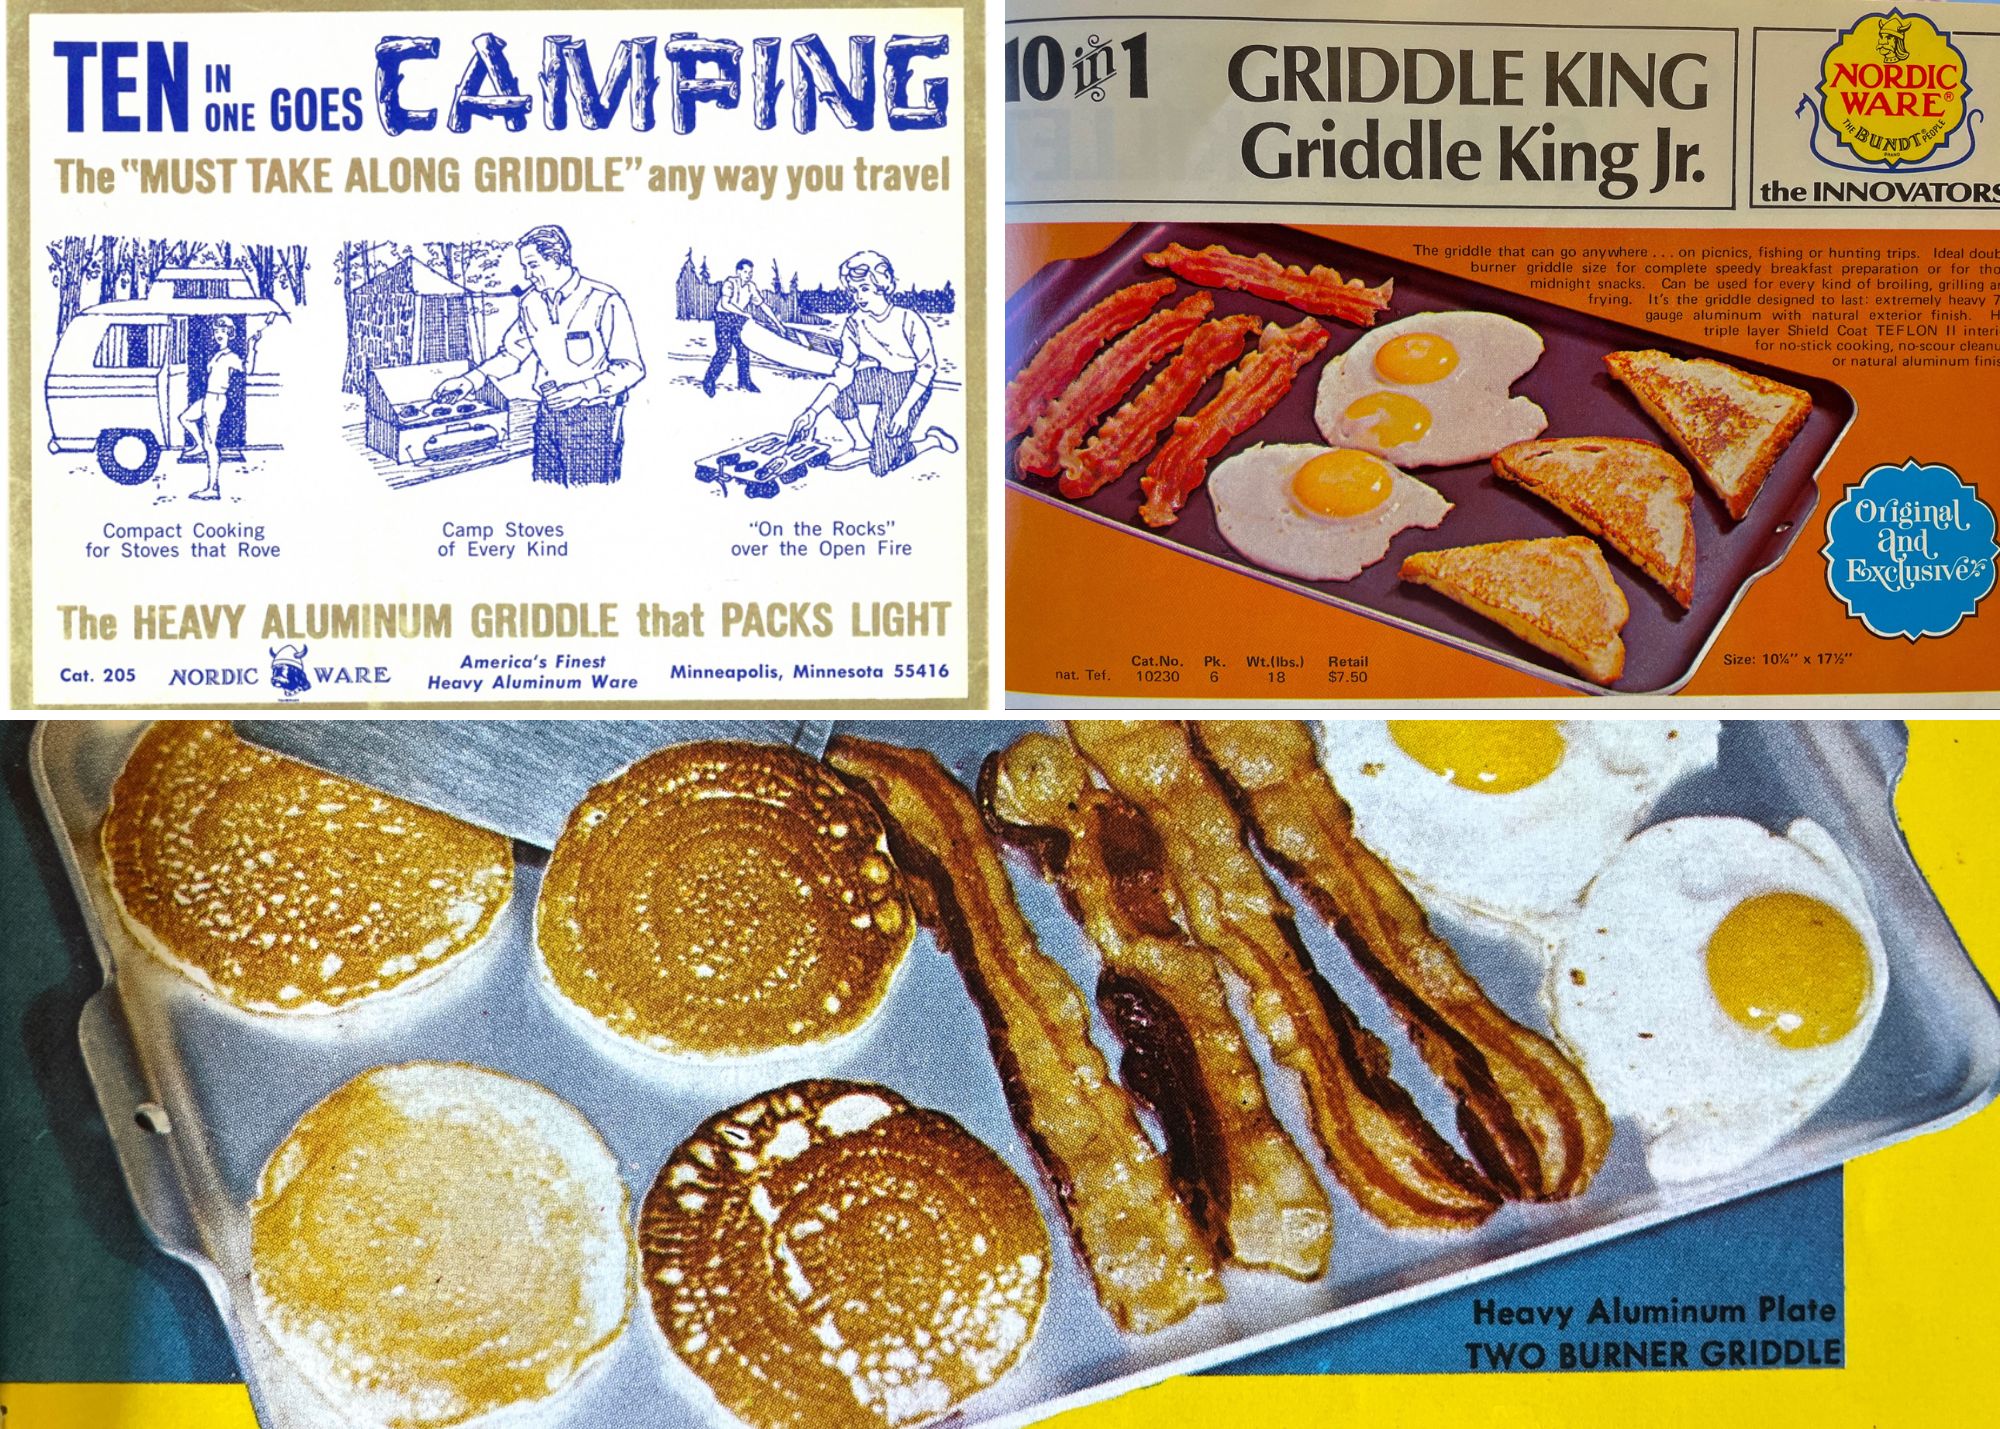 Collage of old Nordic Ware griddle images from catalogs, vinage